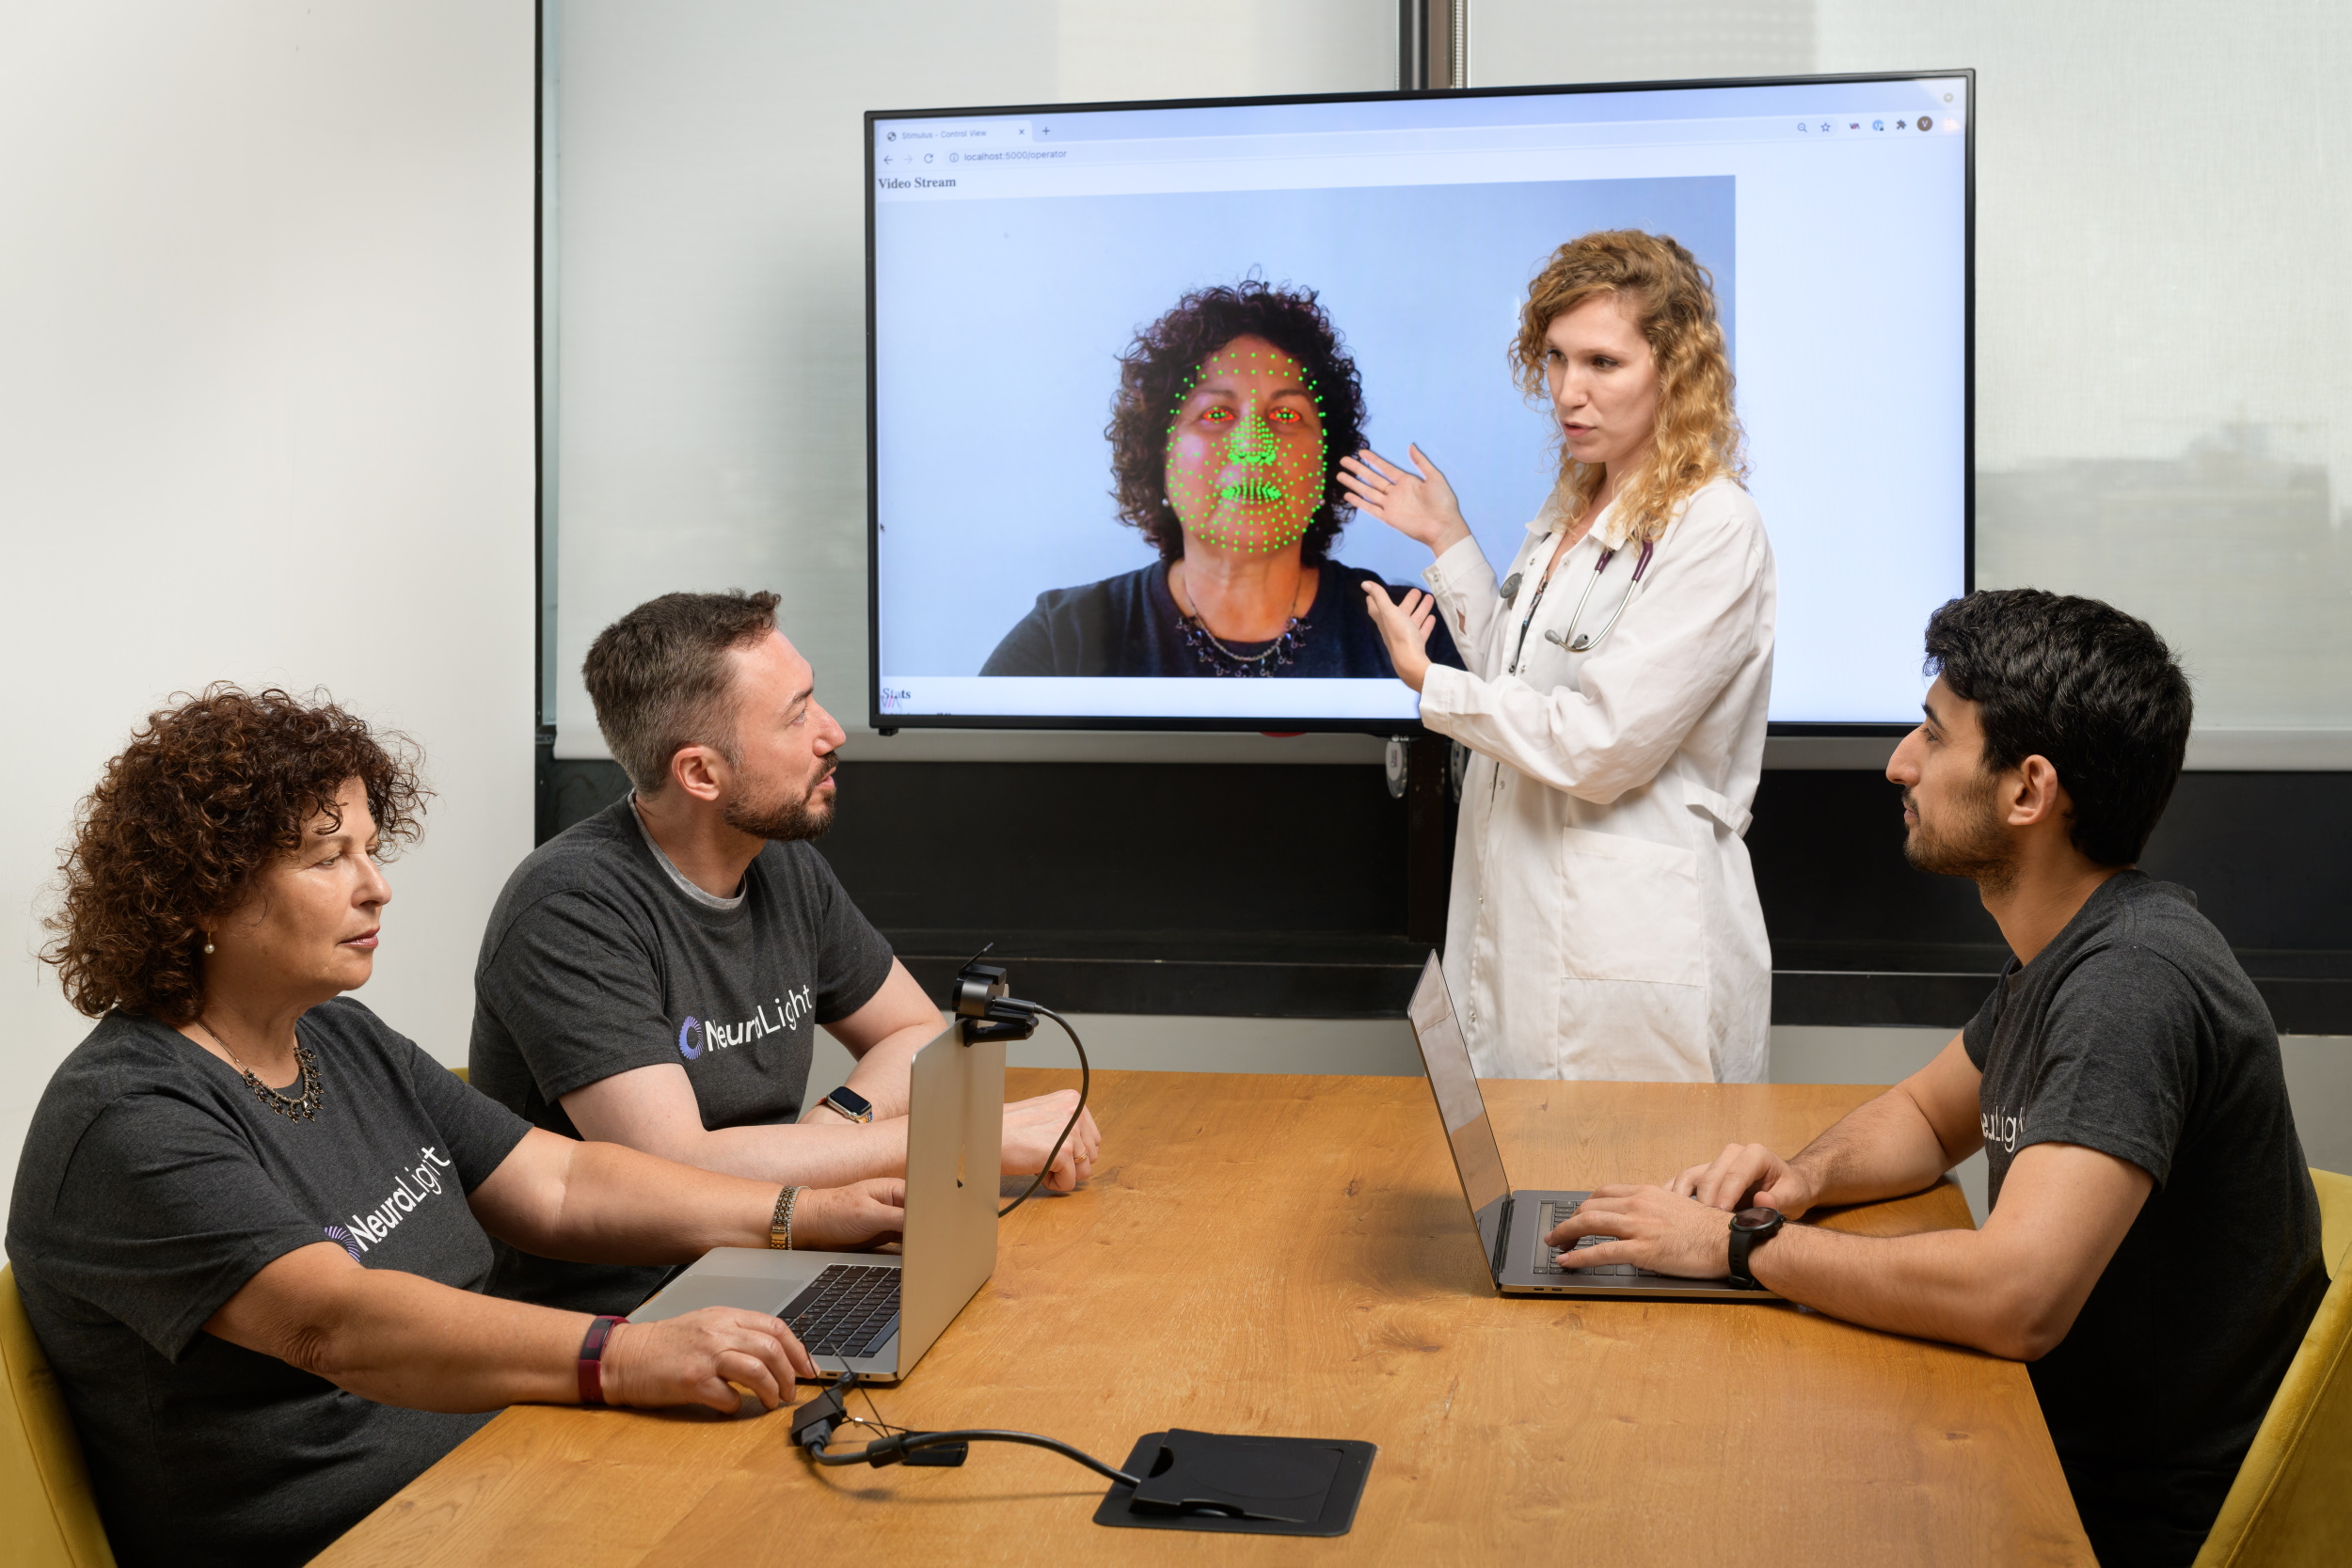 A meeting in an office showing digital readings of a preson's face.